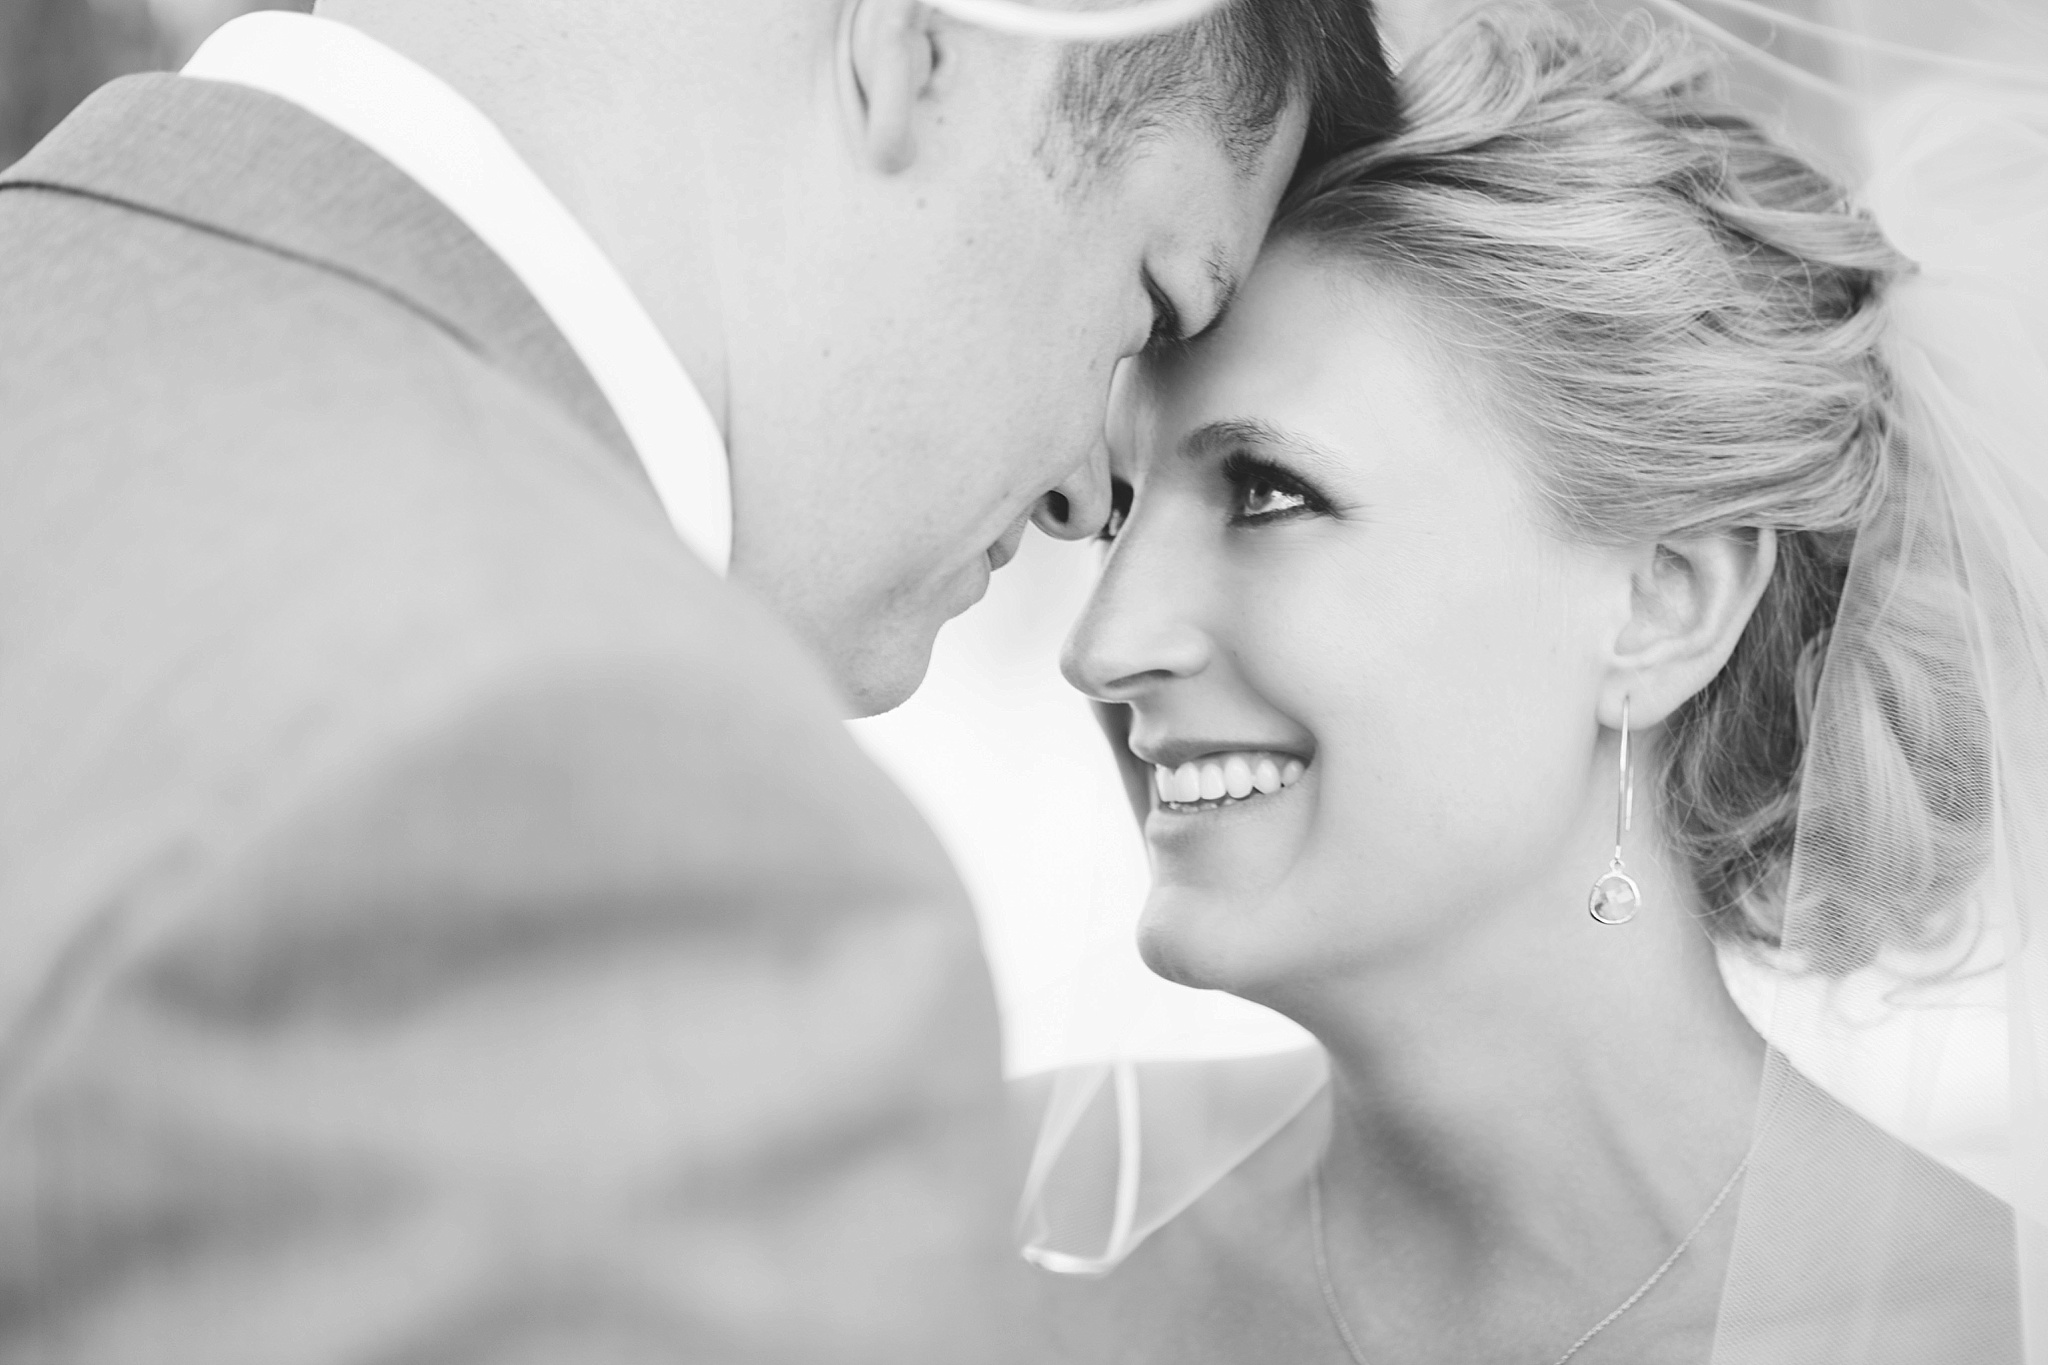 Missoula Country Club Wedding Photos Couple Laughing